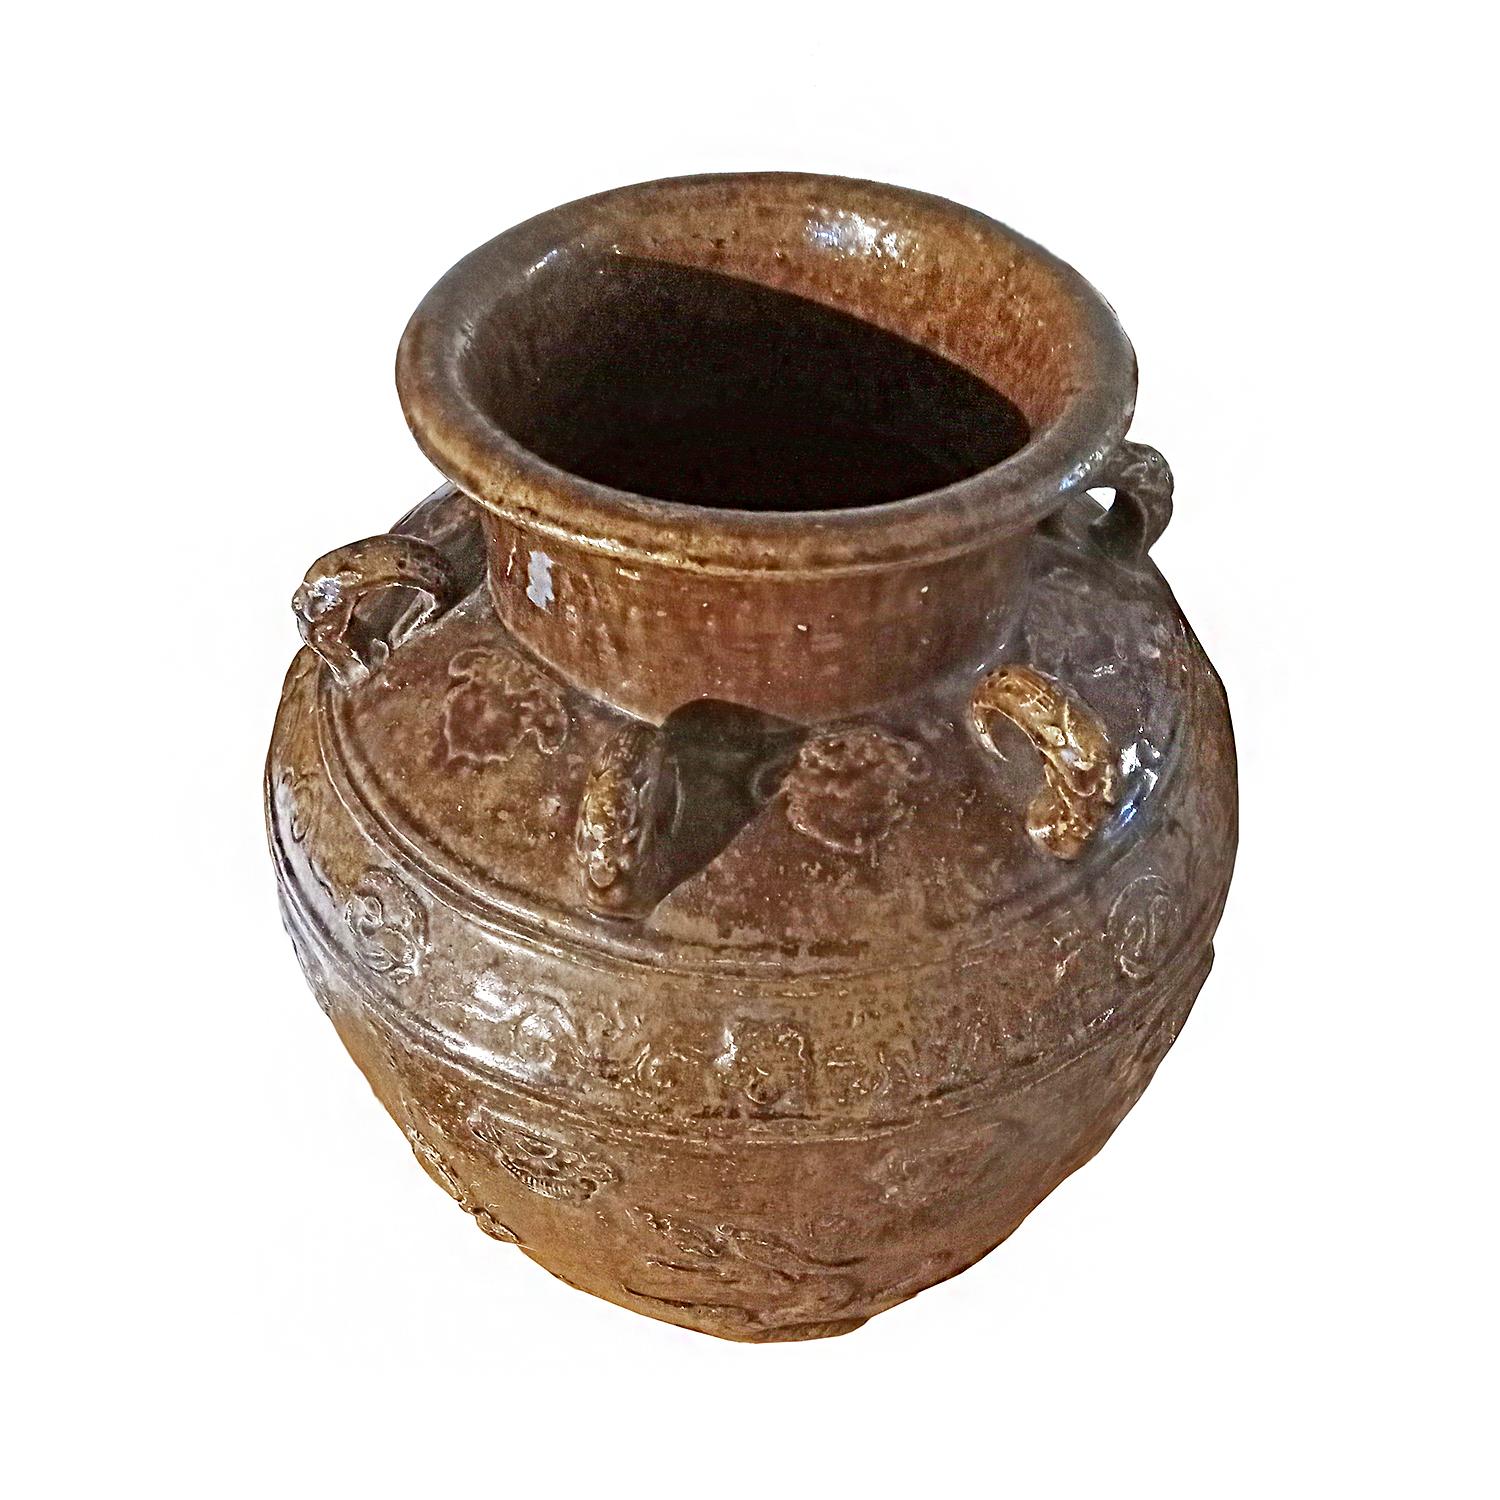 Indonesian Terracotta Urn / Jar / Vase with Brown Glaze and Dragon Motif For Sale 2